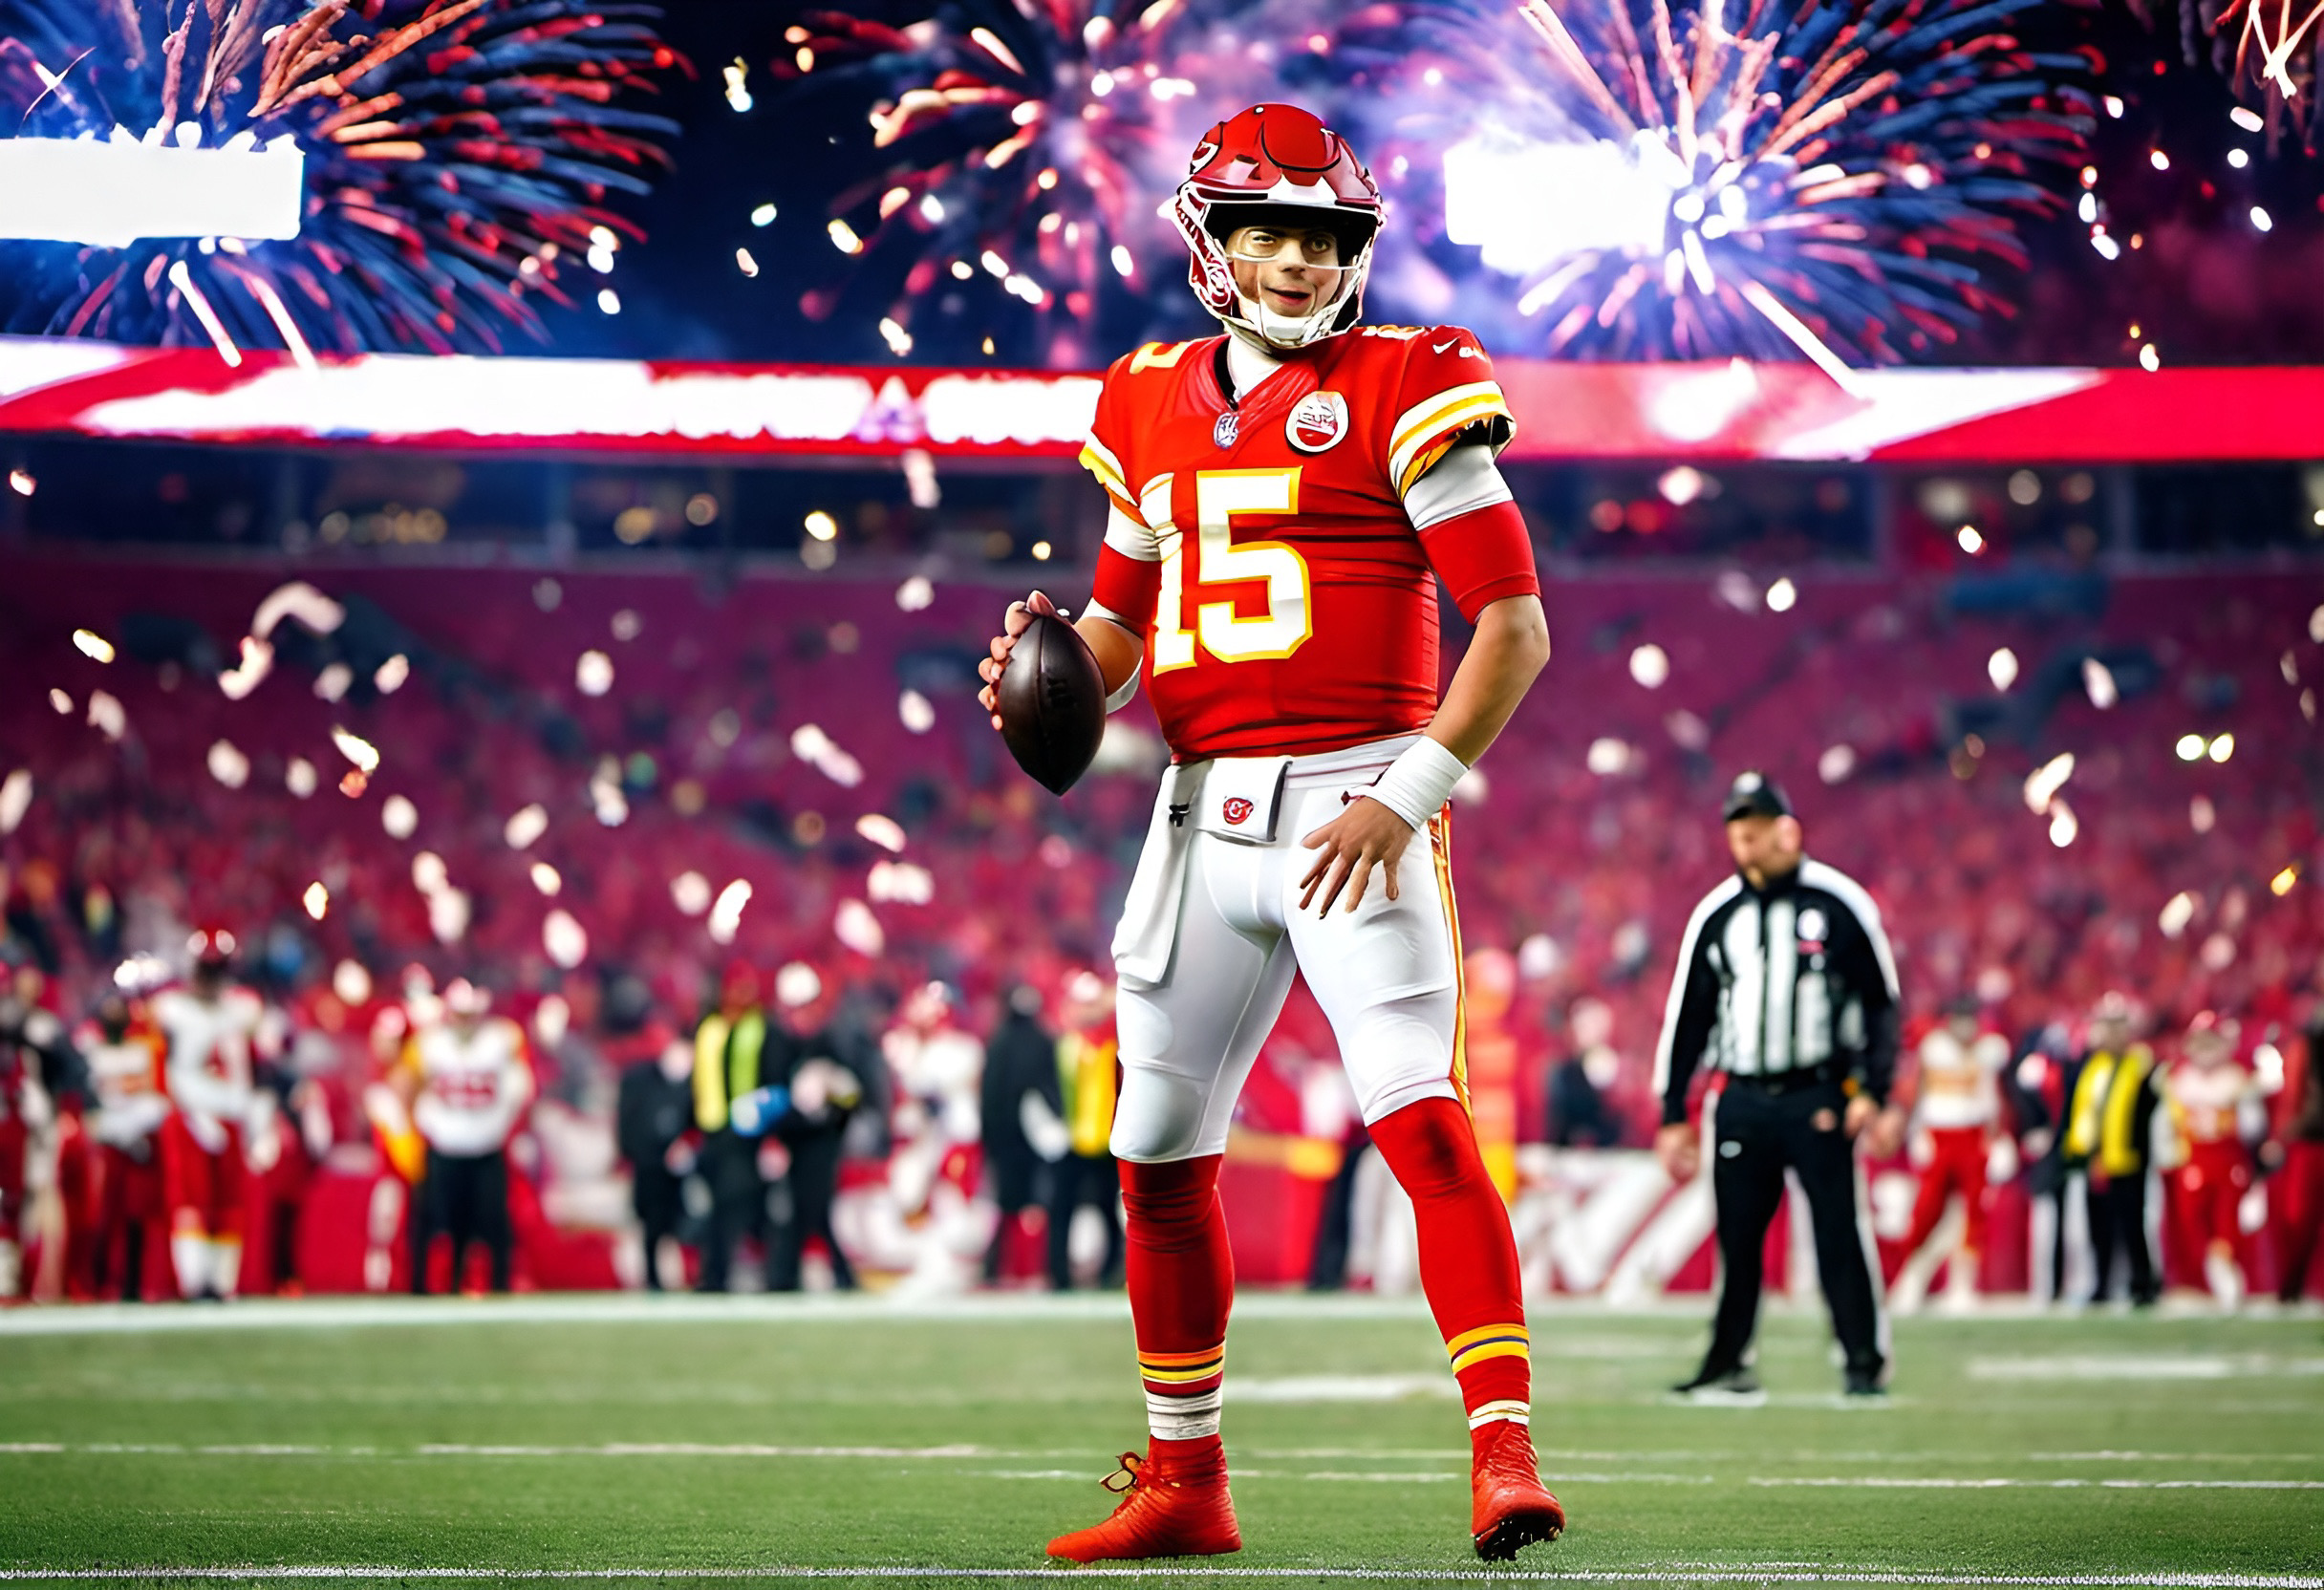 Super Bowl 58 NFL Analytics Guide: Mahomes, Chiefs With Passing Game Edge